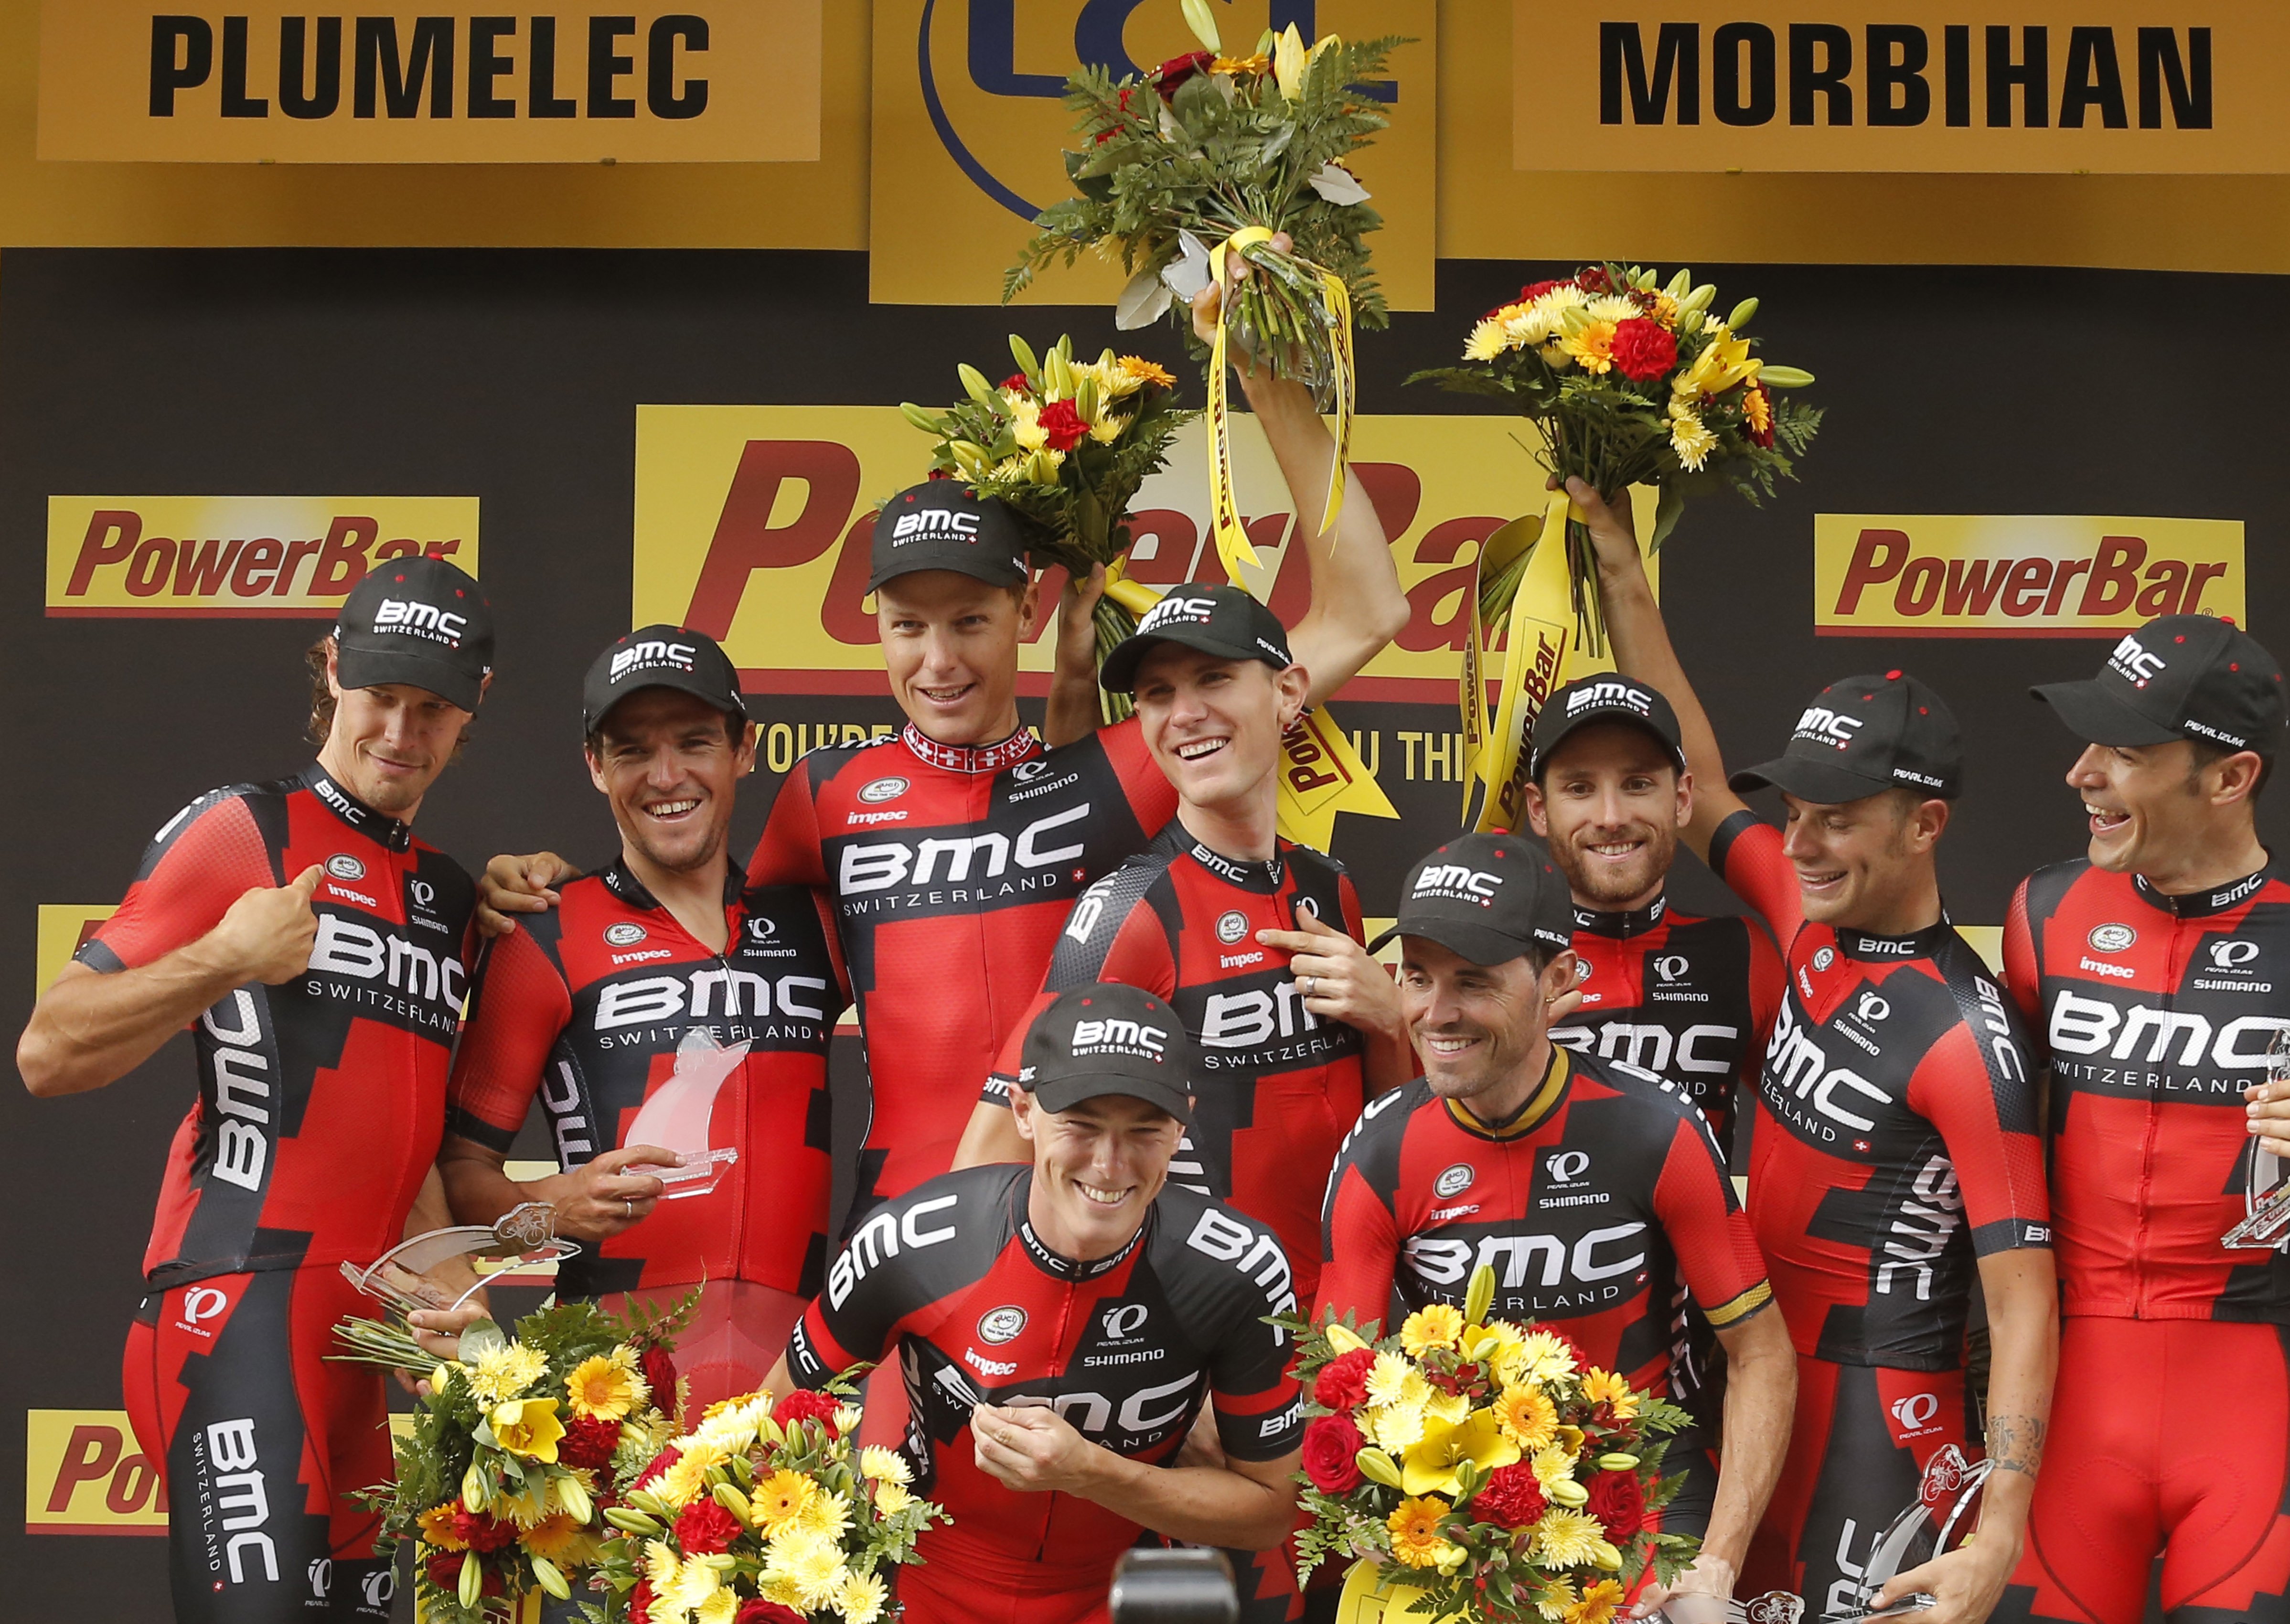 Tejay van Garderen (centre) and BMC Racing Team celebrate winning the ninth stage of the Tour de France, a 28-kilometre team time trial from Vannes to Plumelec. Photos: AP